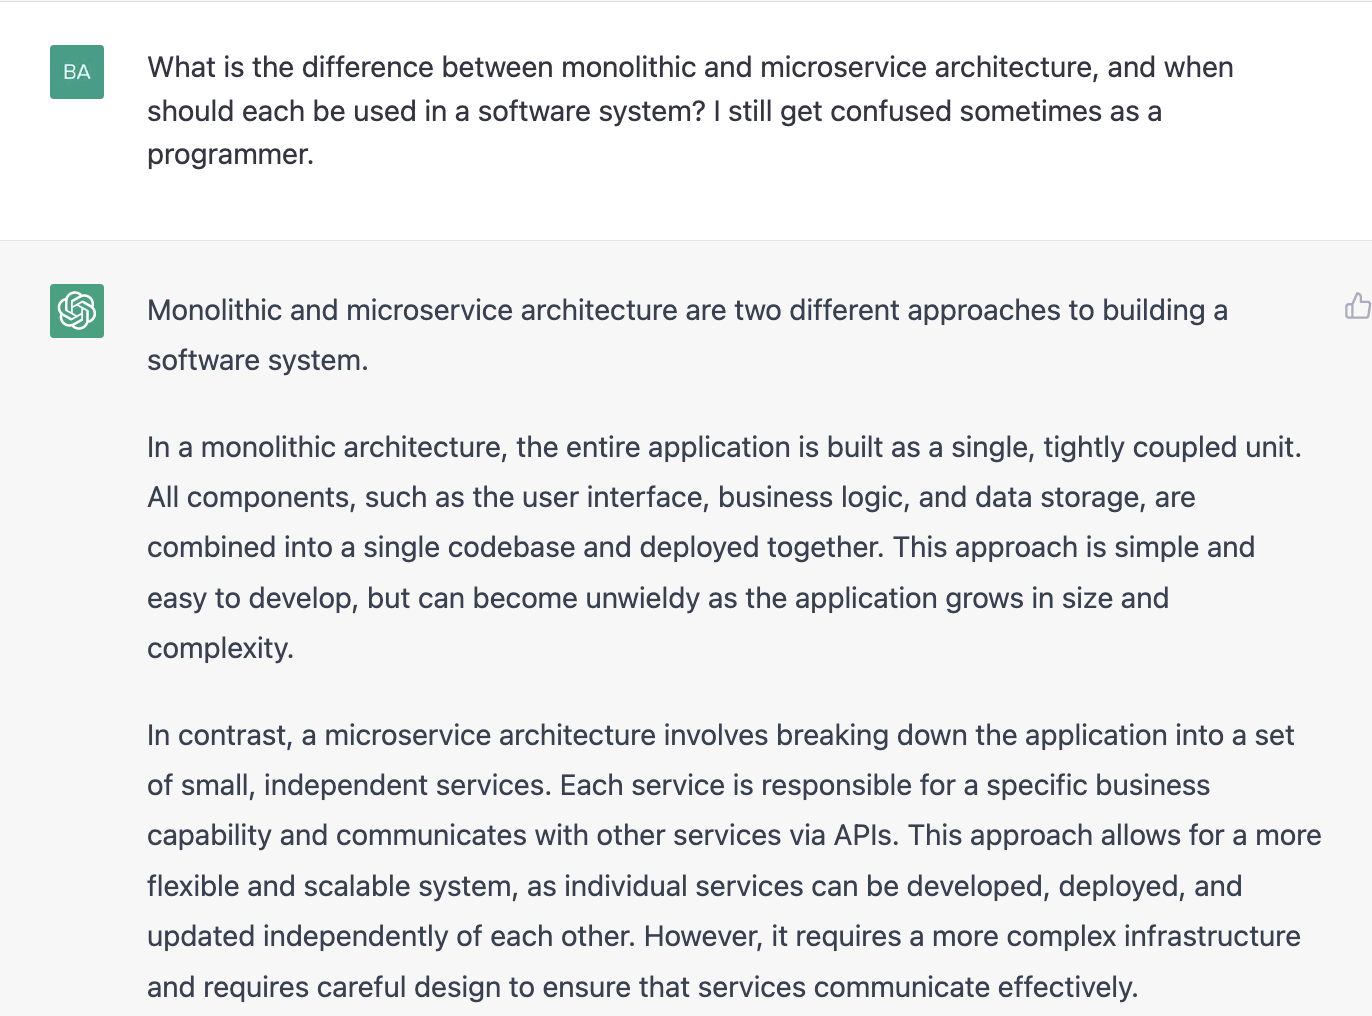 ChatGPT prompt about the difference between monolithic and microservice architecture and when should be used in a software system